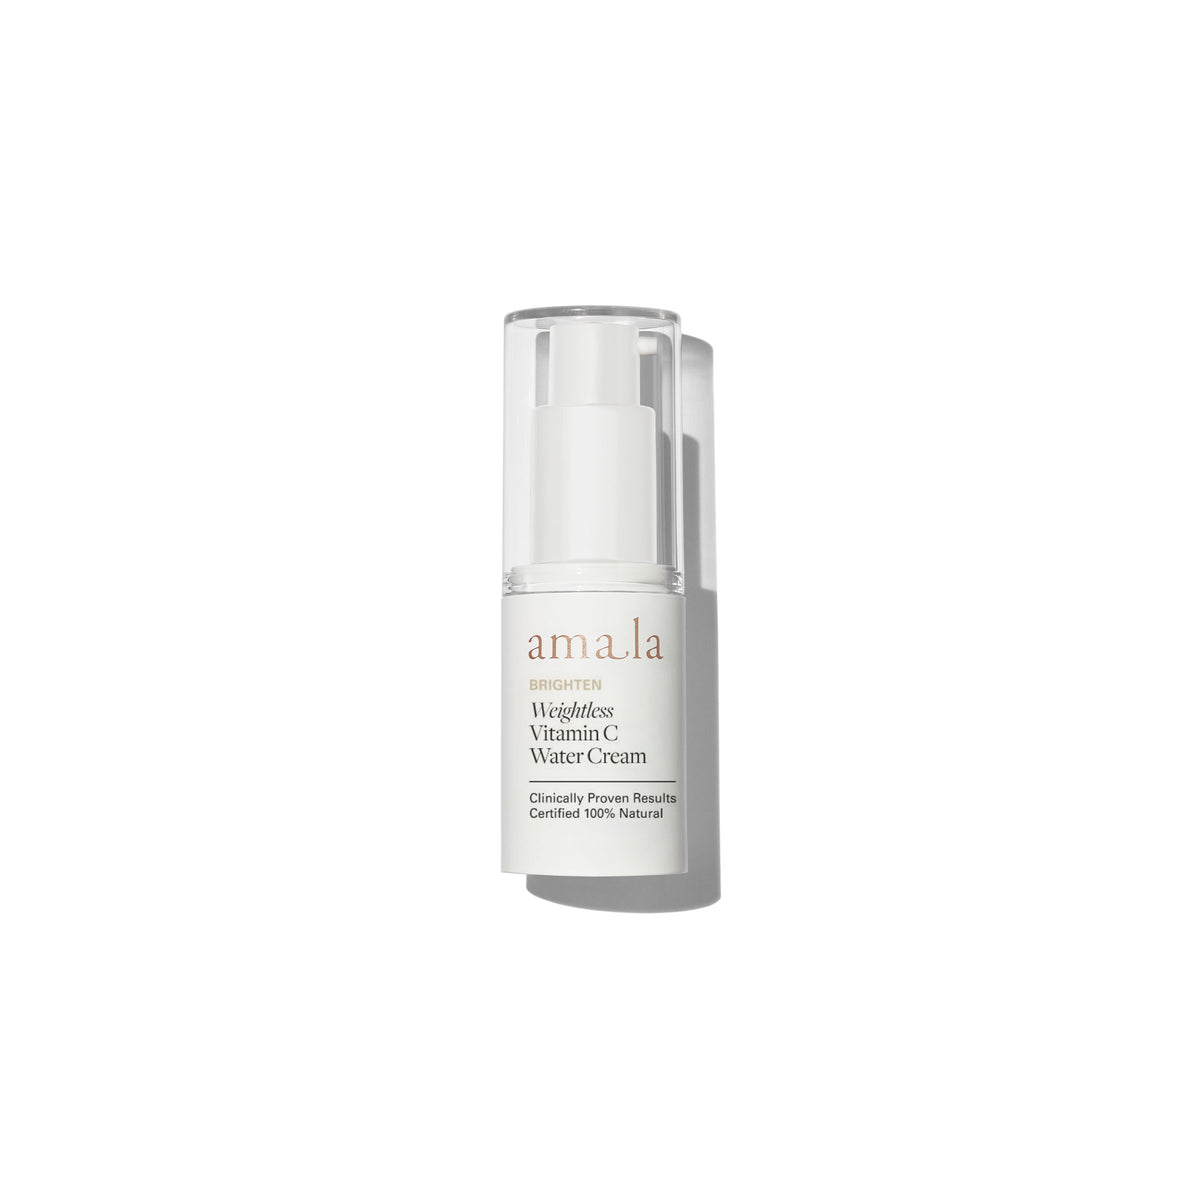 Weightless Vitamin C Water Cream 15ml Experience Size by Amala